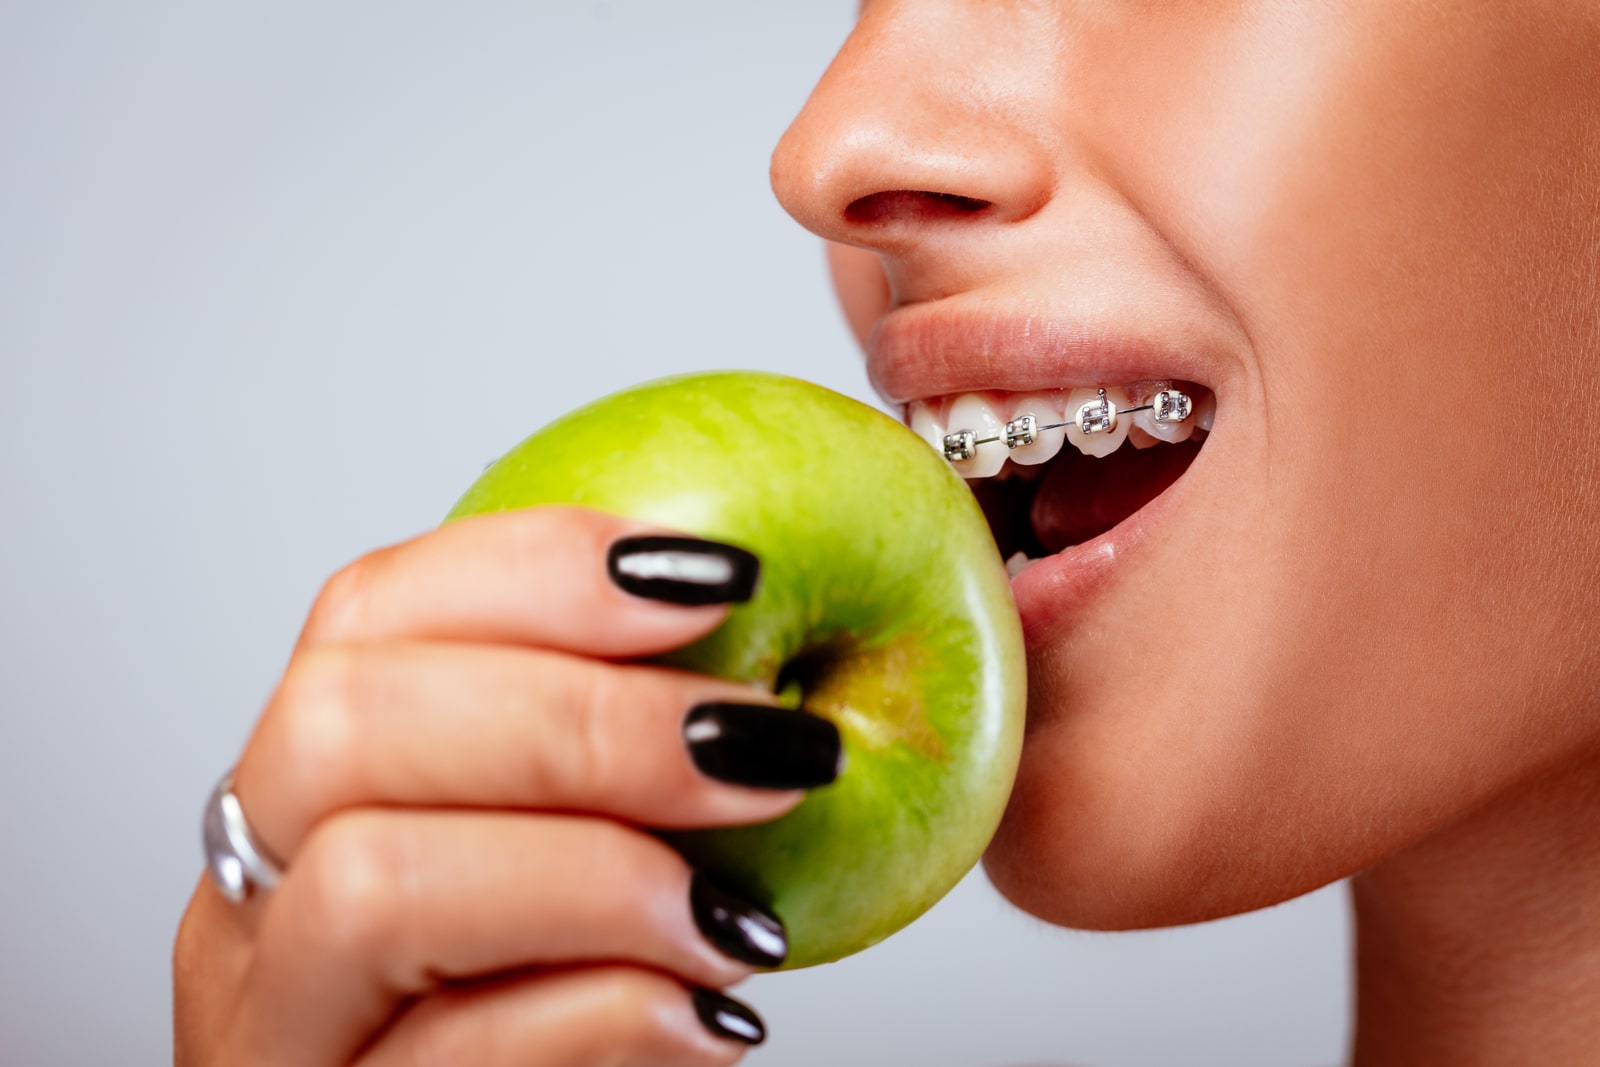 Avoid These Foods and Drinks that Damage Teeth and Gums